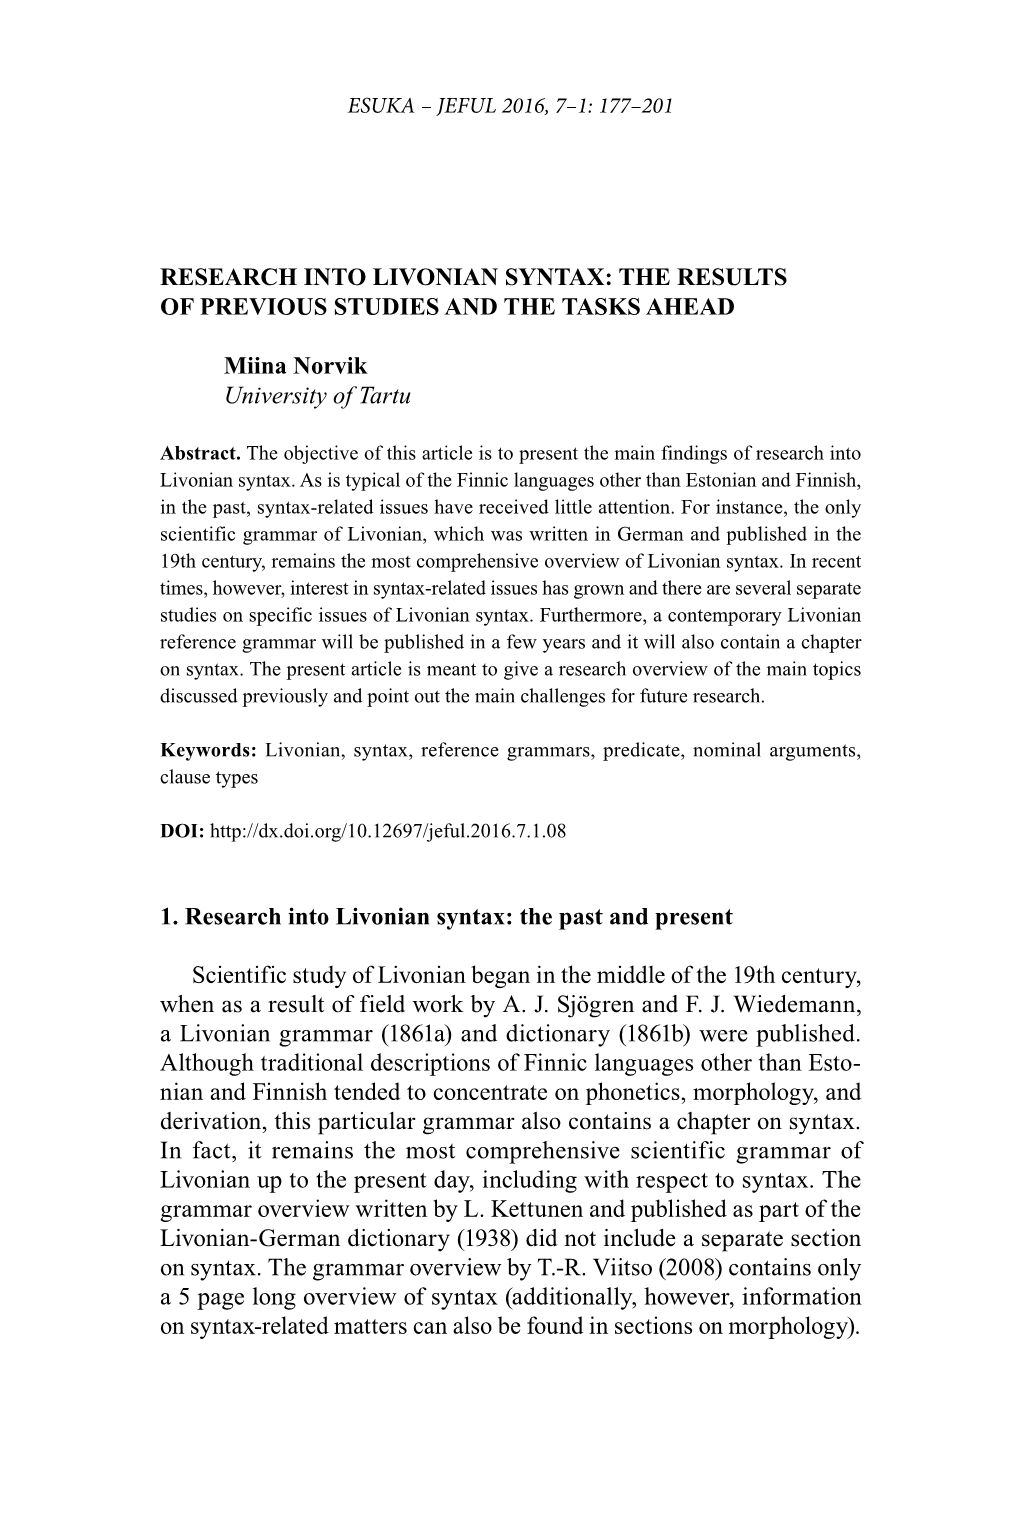 Research Into Livonian Syntax: the Results of Previous Studies and the Tasks Ahead